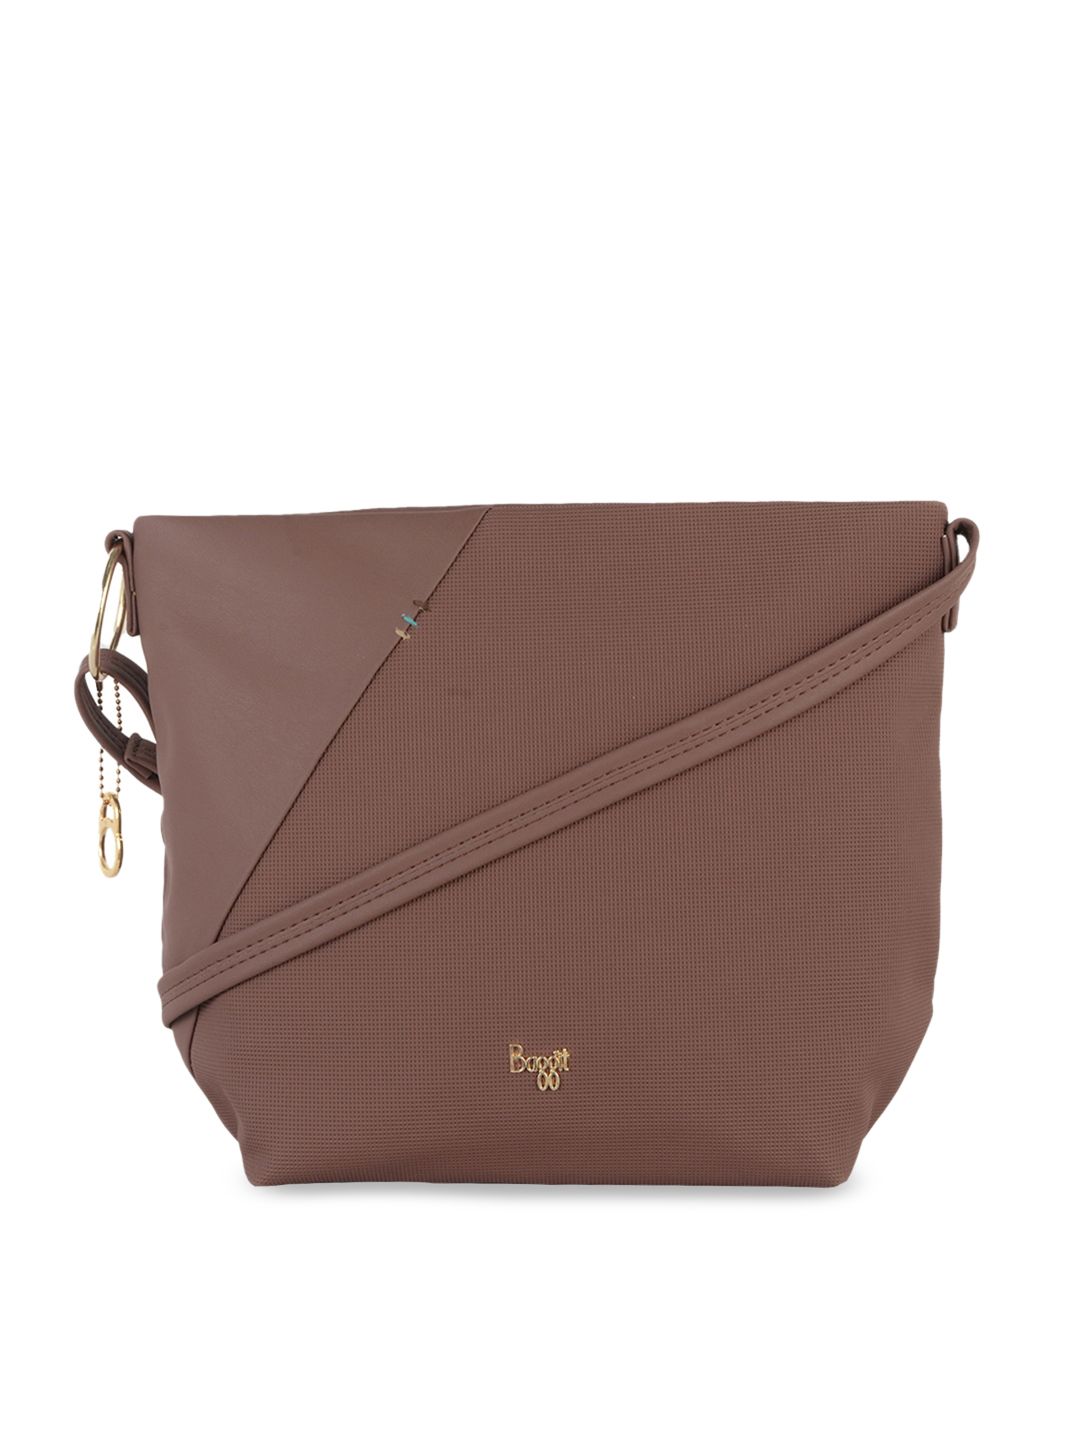 Baggit Brown Structured Sling Bag Price in India